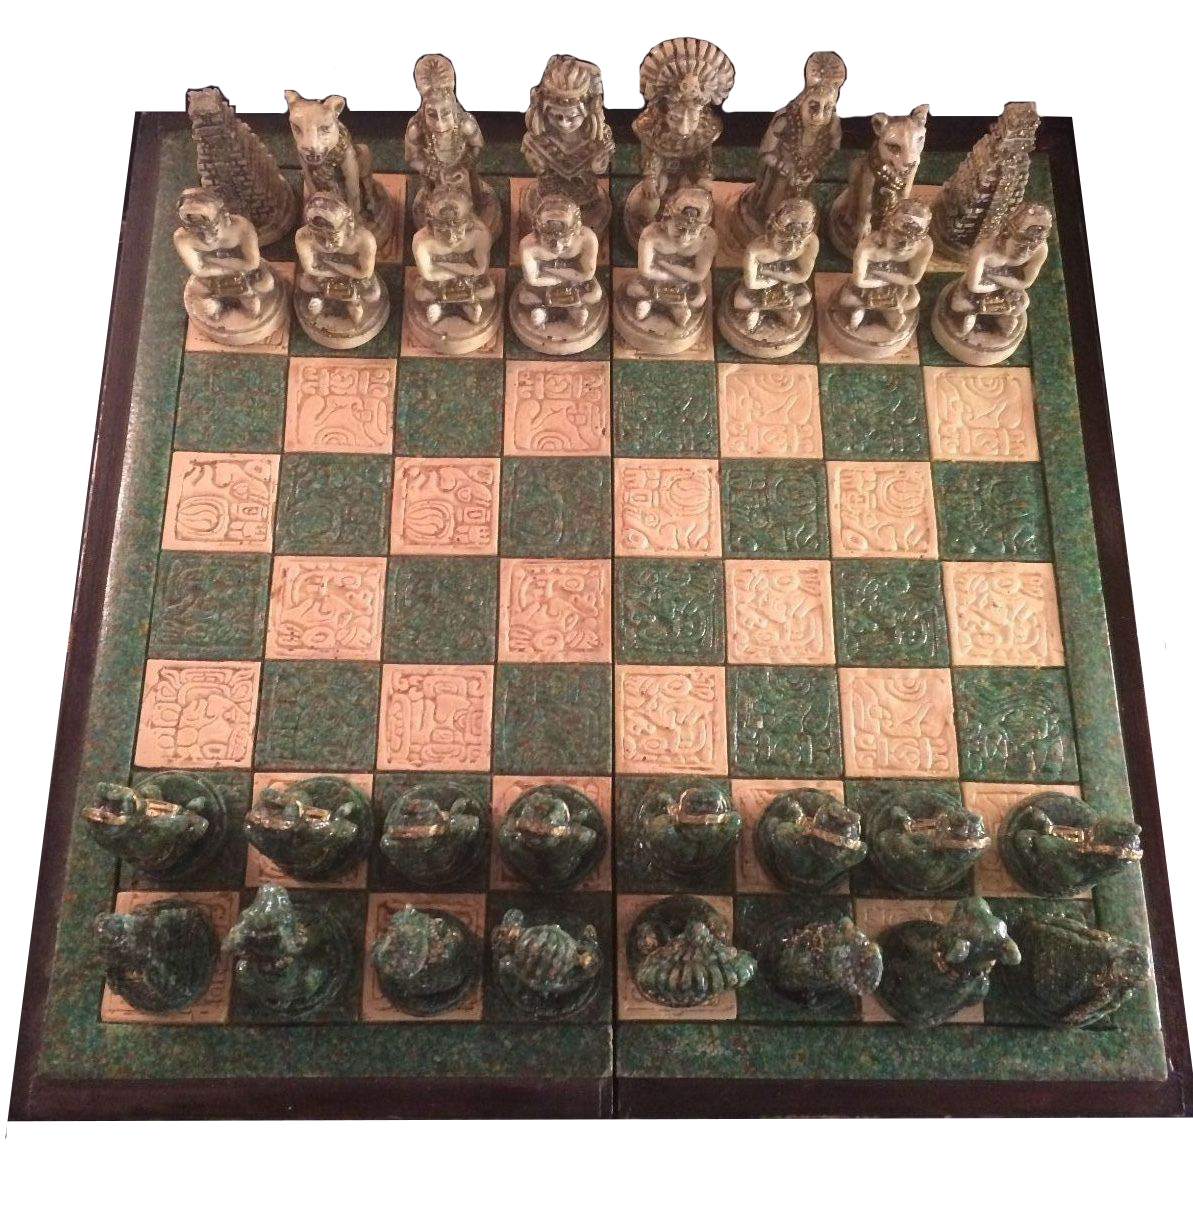 Antique Wood and Stone Mayan/Mexican Chess Set